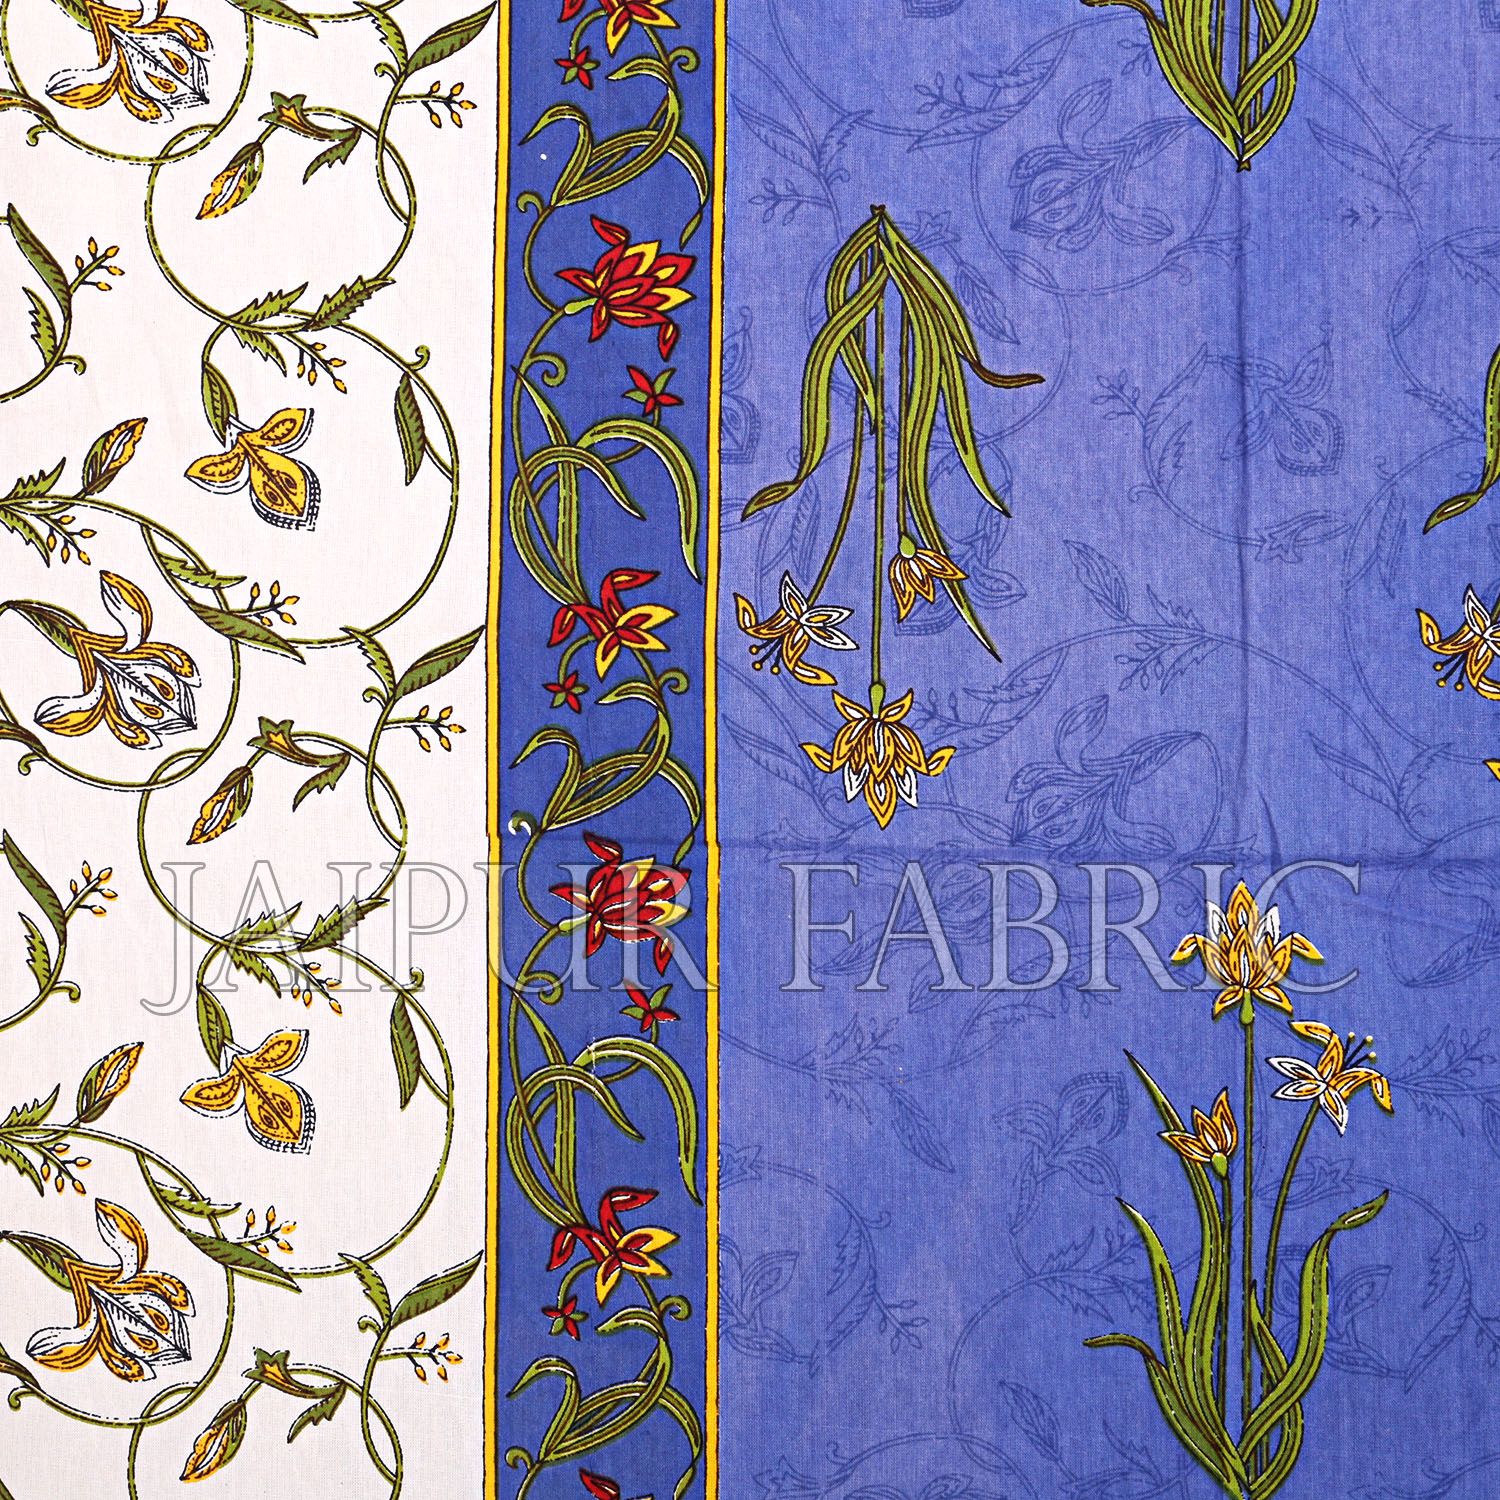 Blue And Cream Border With Blue Base With  Small Mughal Print Cotton Double Bedsheet